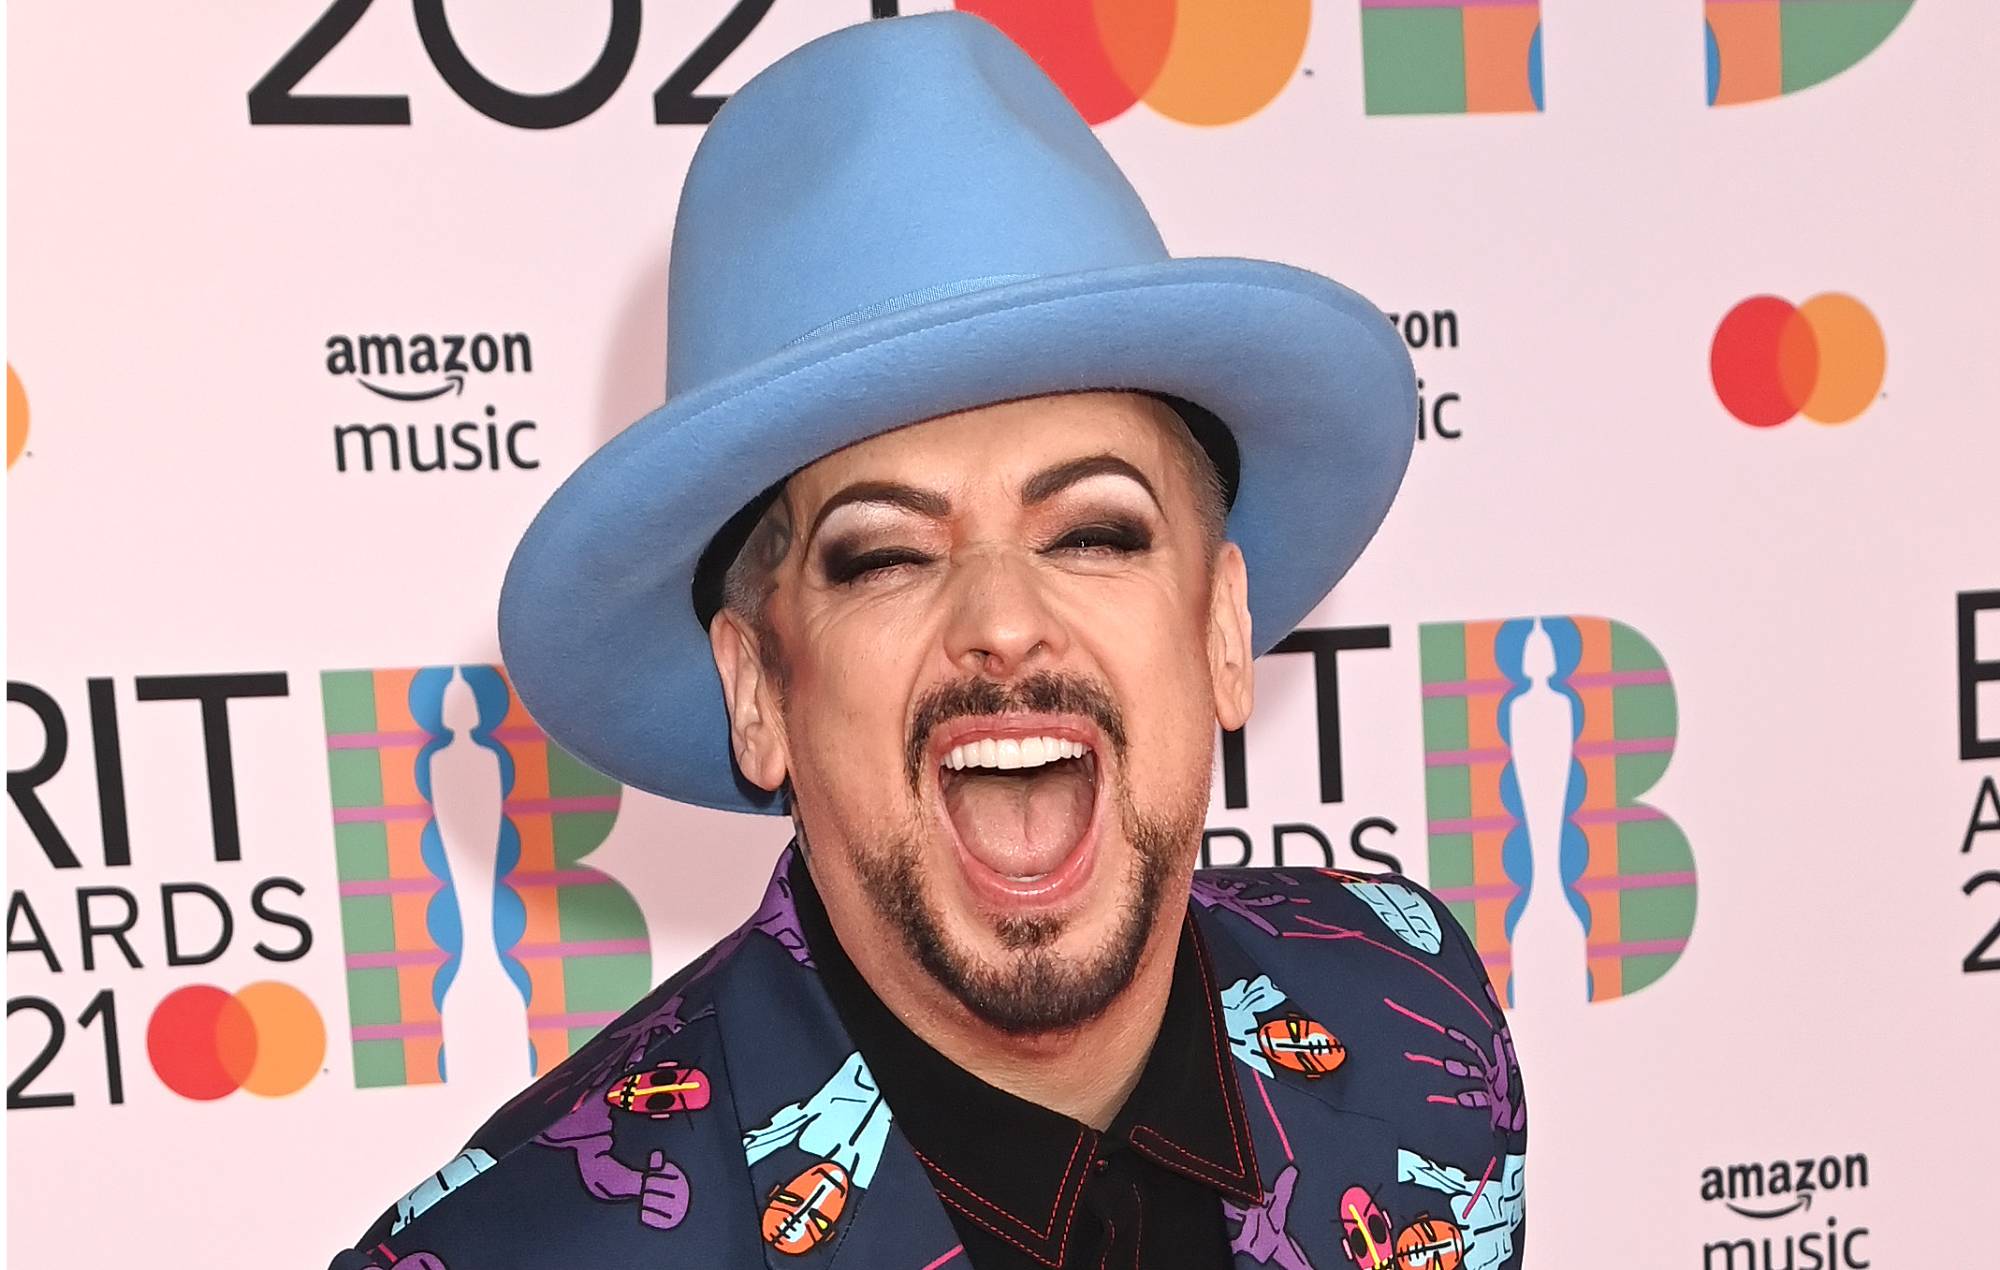 Boy George: “There’s been this loss of respect for the artistry of songwriting”